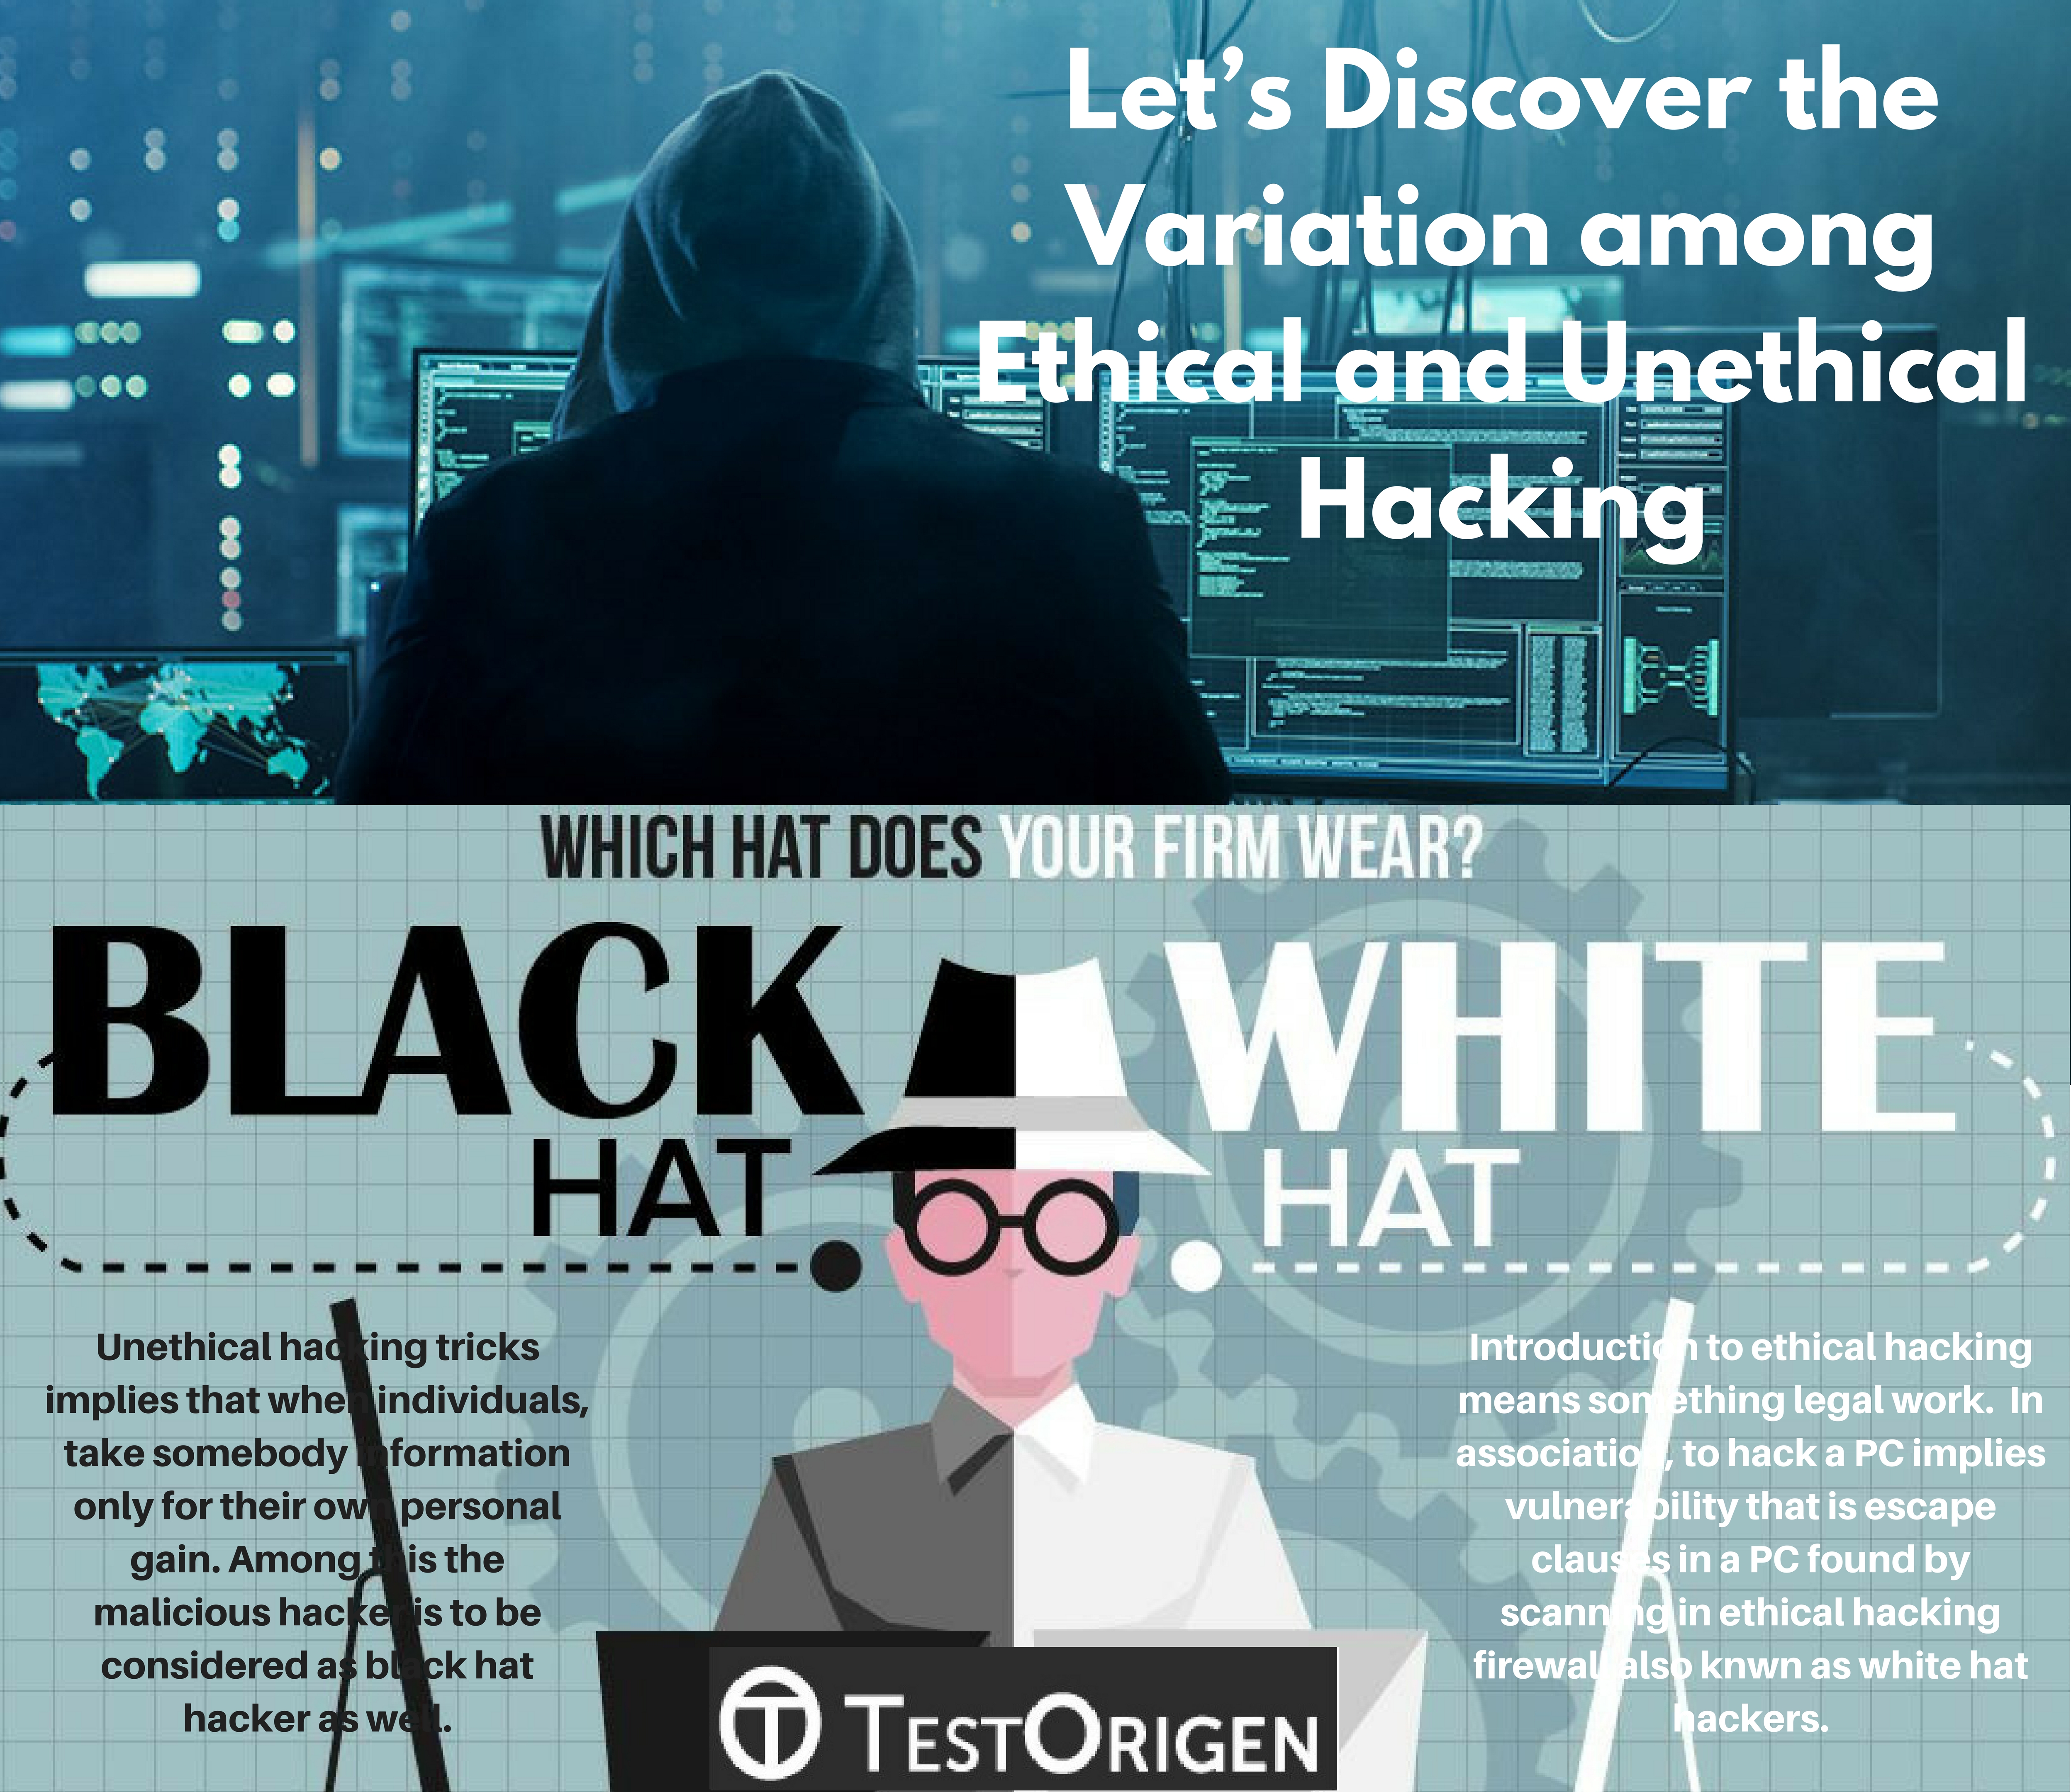 Let’s Discover the Variation among Ethical and Unethical Hacking